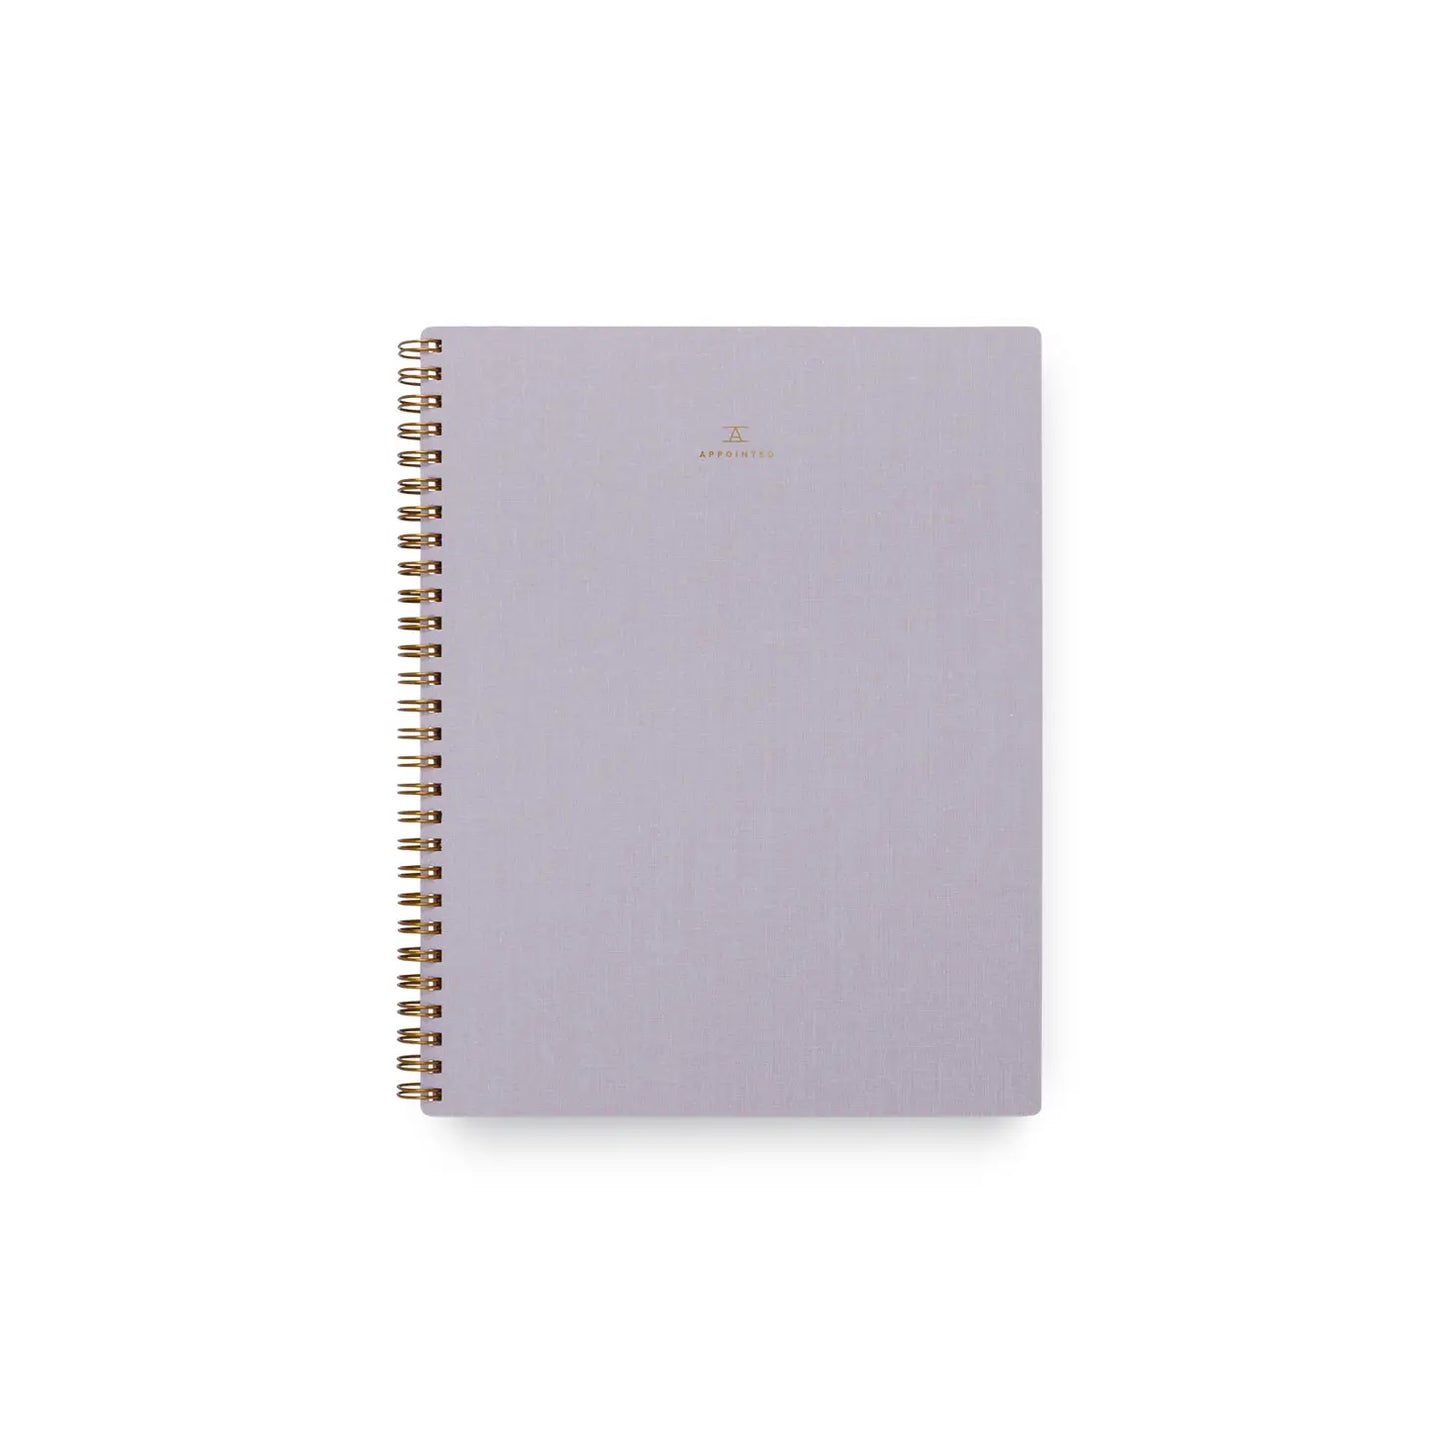 The Appointed Notebook